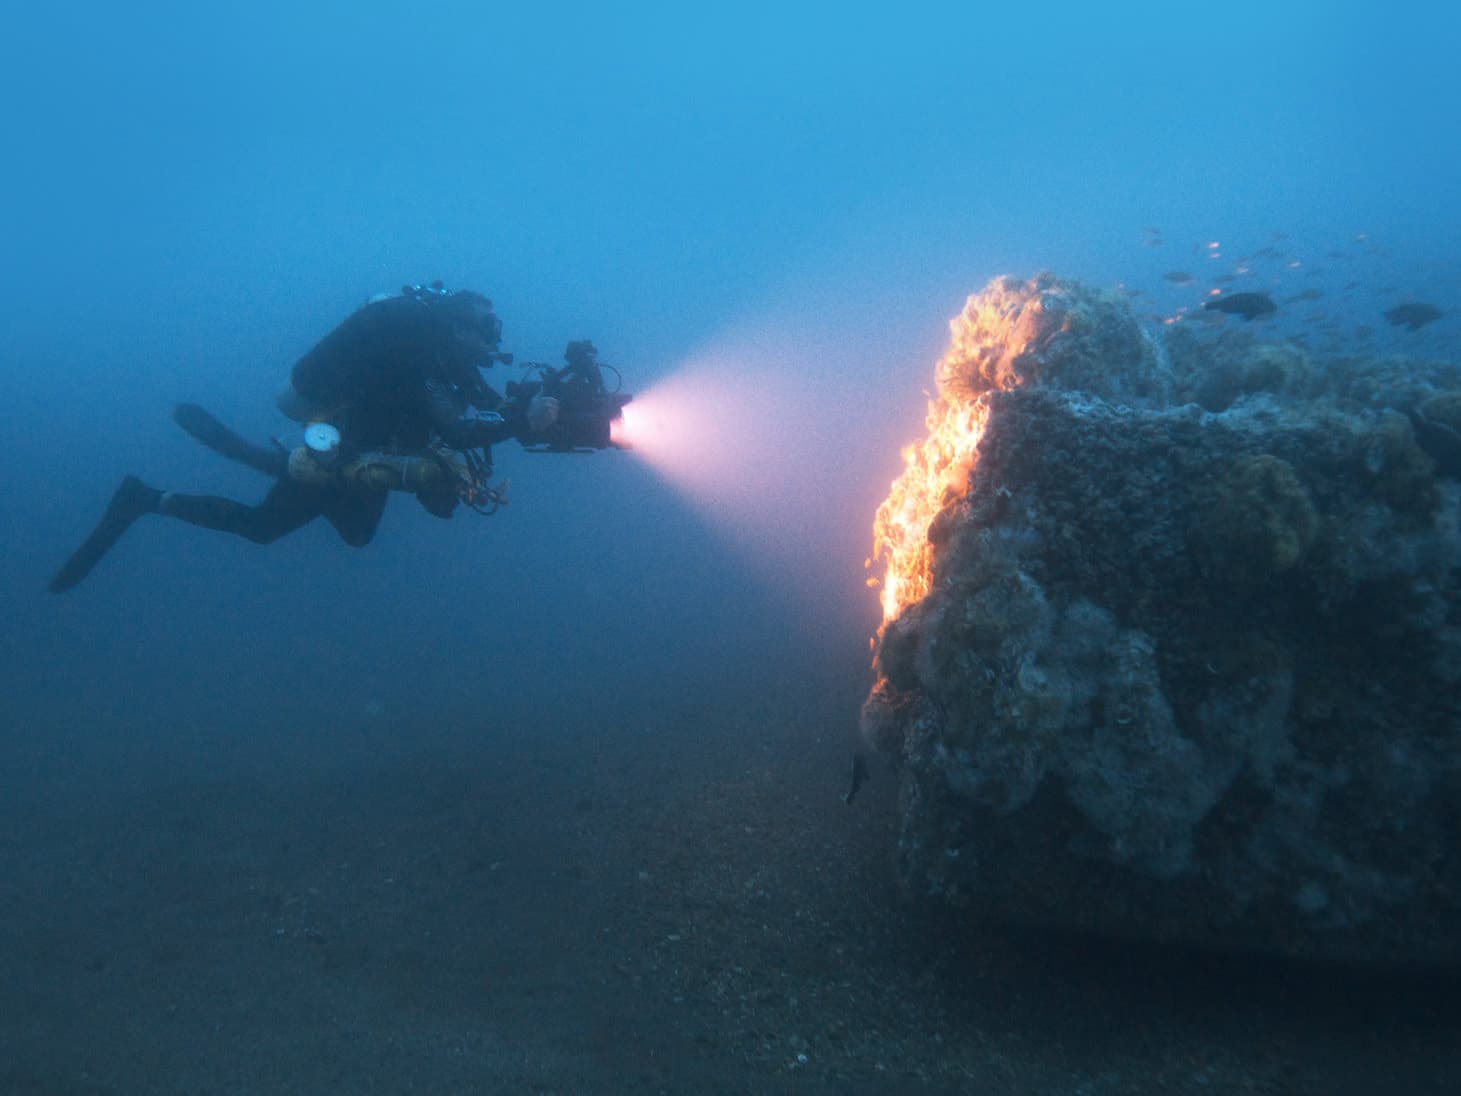 diver photographing the wreck of the uss monitor